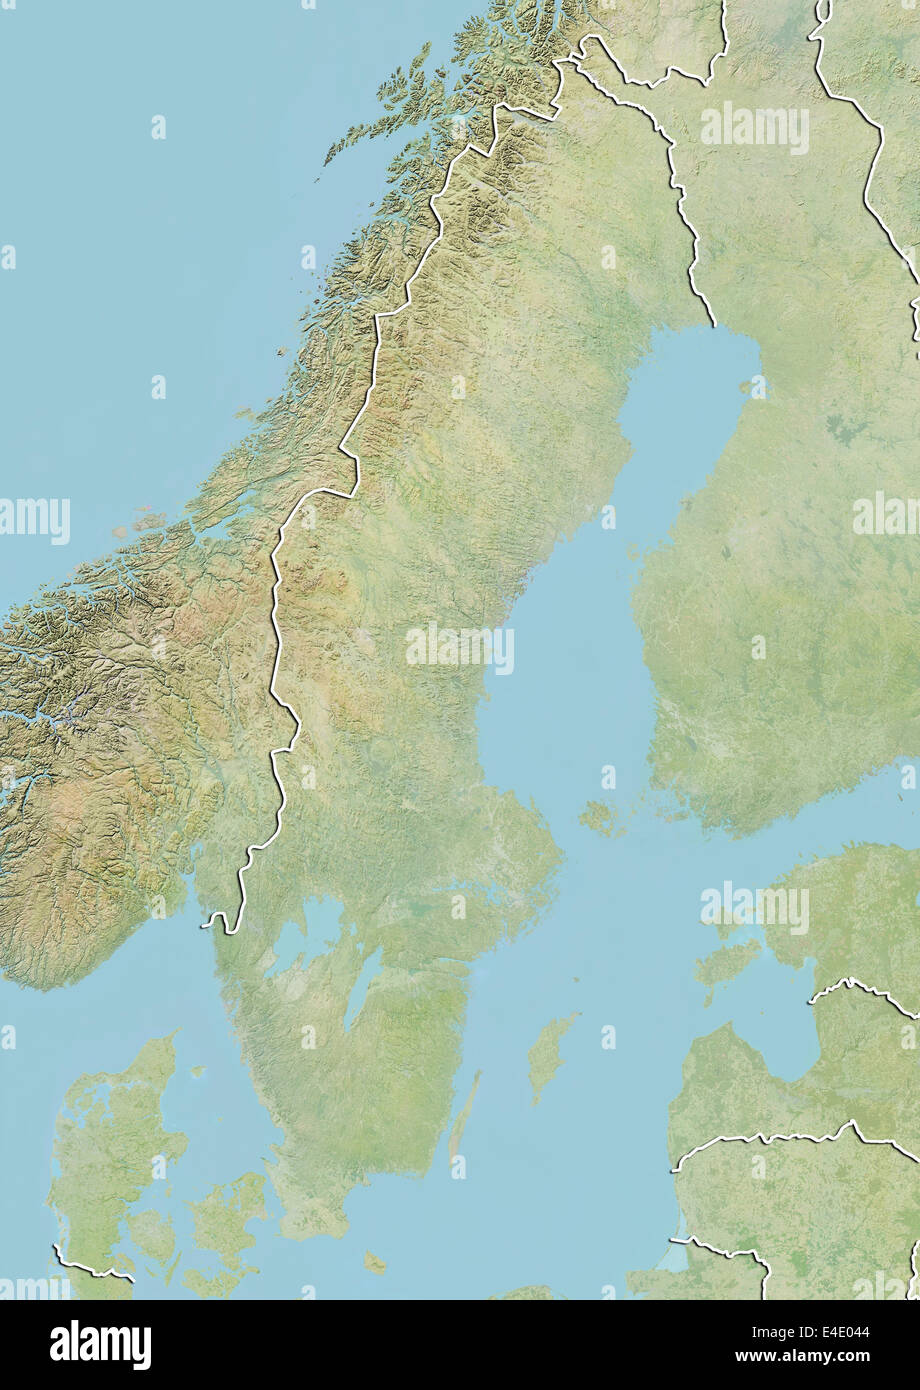 Sweden, Relief Map with Border Stock Photo